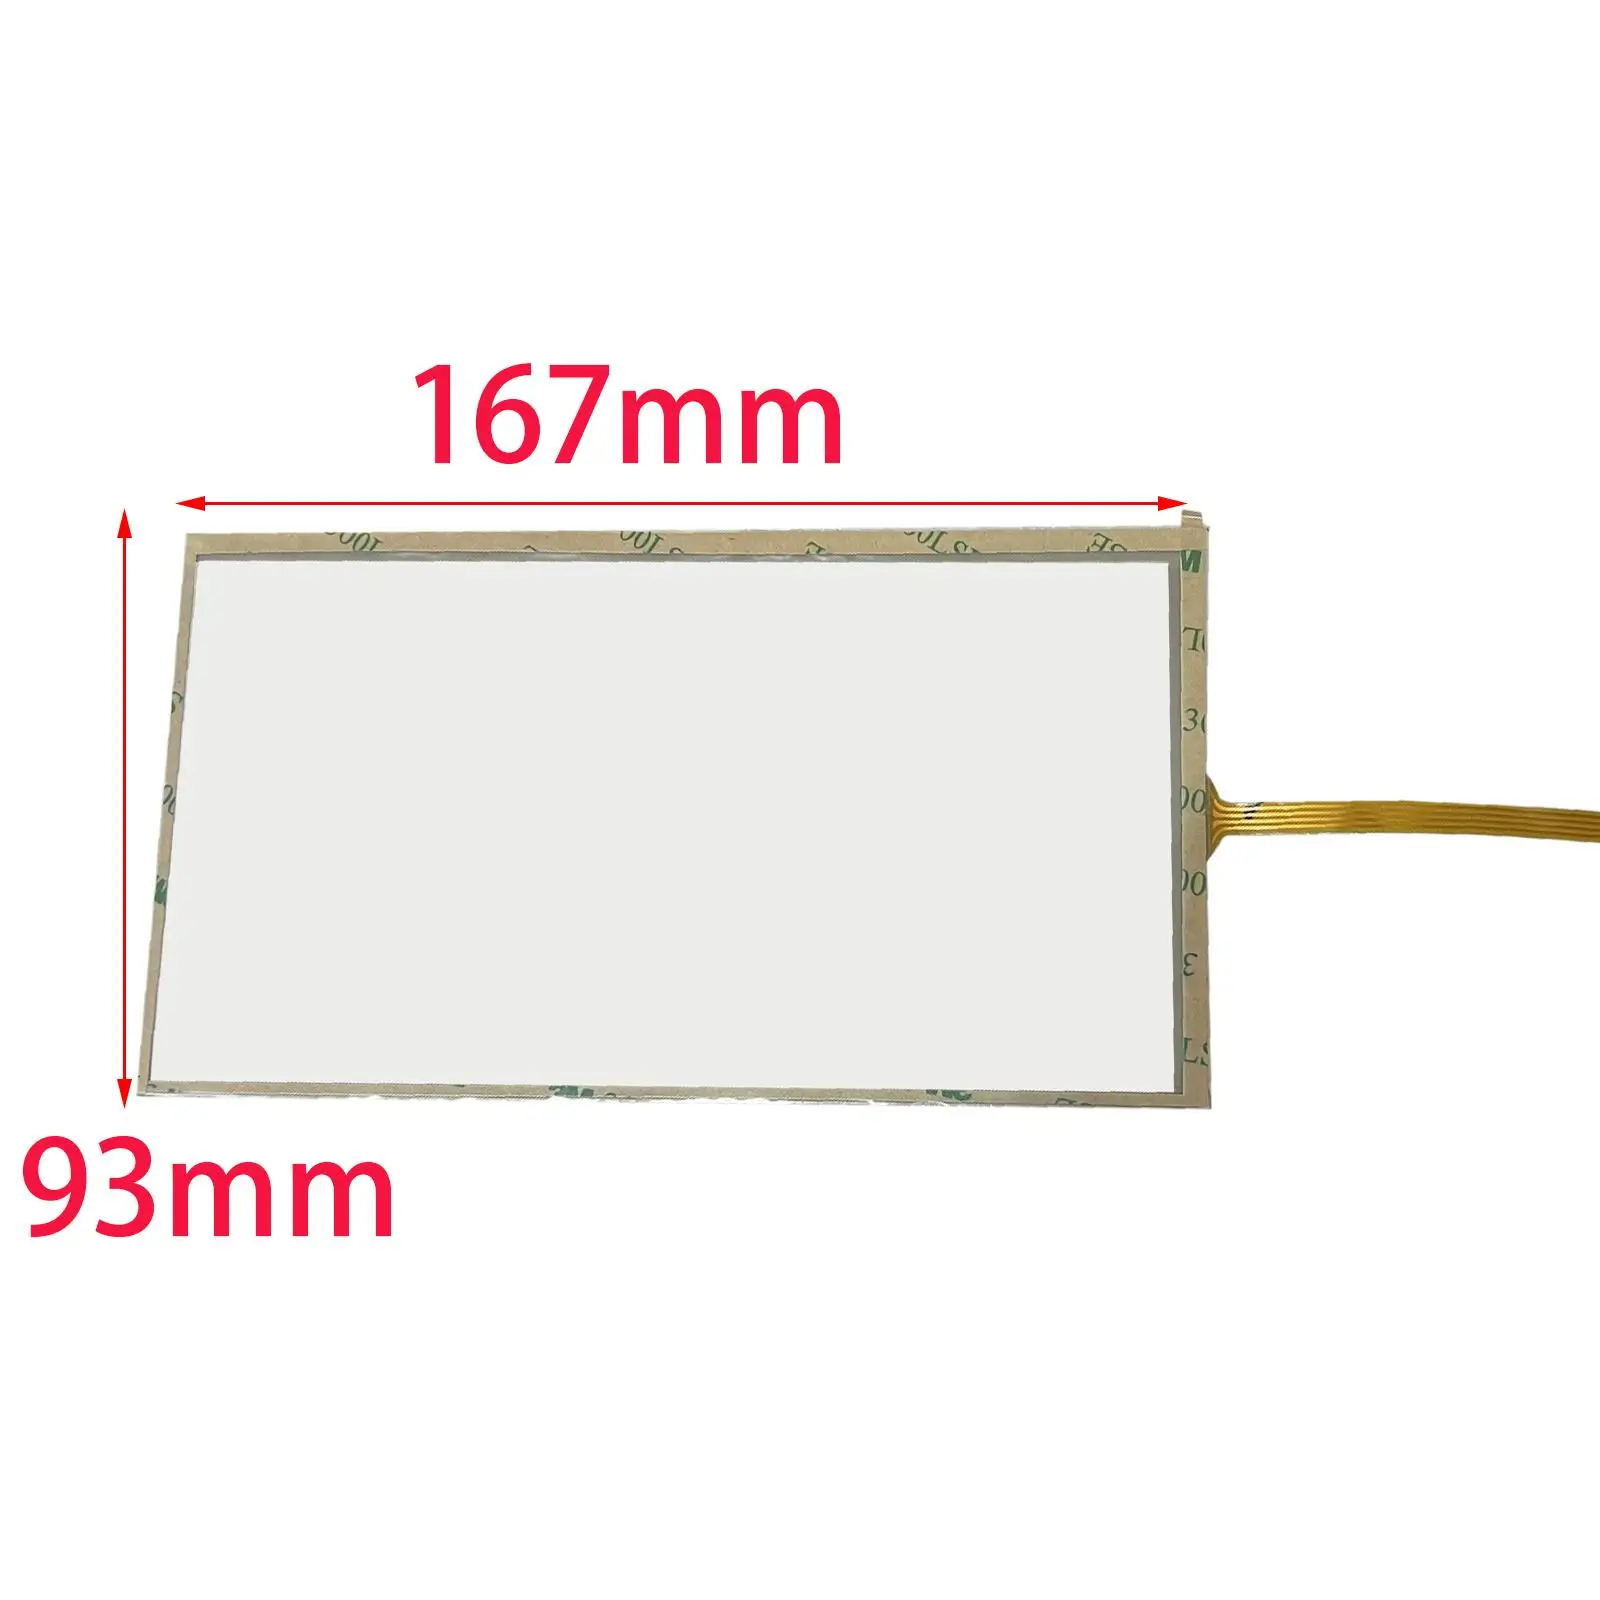 167x93mm Touch Screen LA070wv1TD05 Repair Parts Accessory 7 inch 4 Pin Touch Screen for Chevy Spark Sonic Mylink 2012-2016